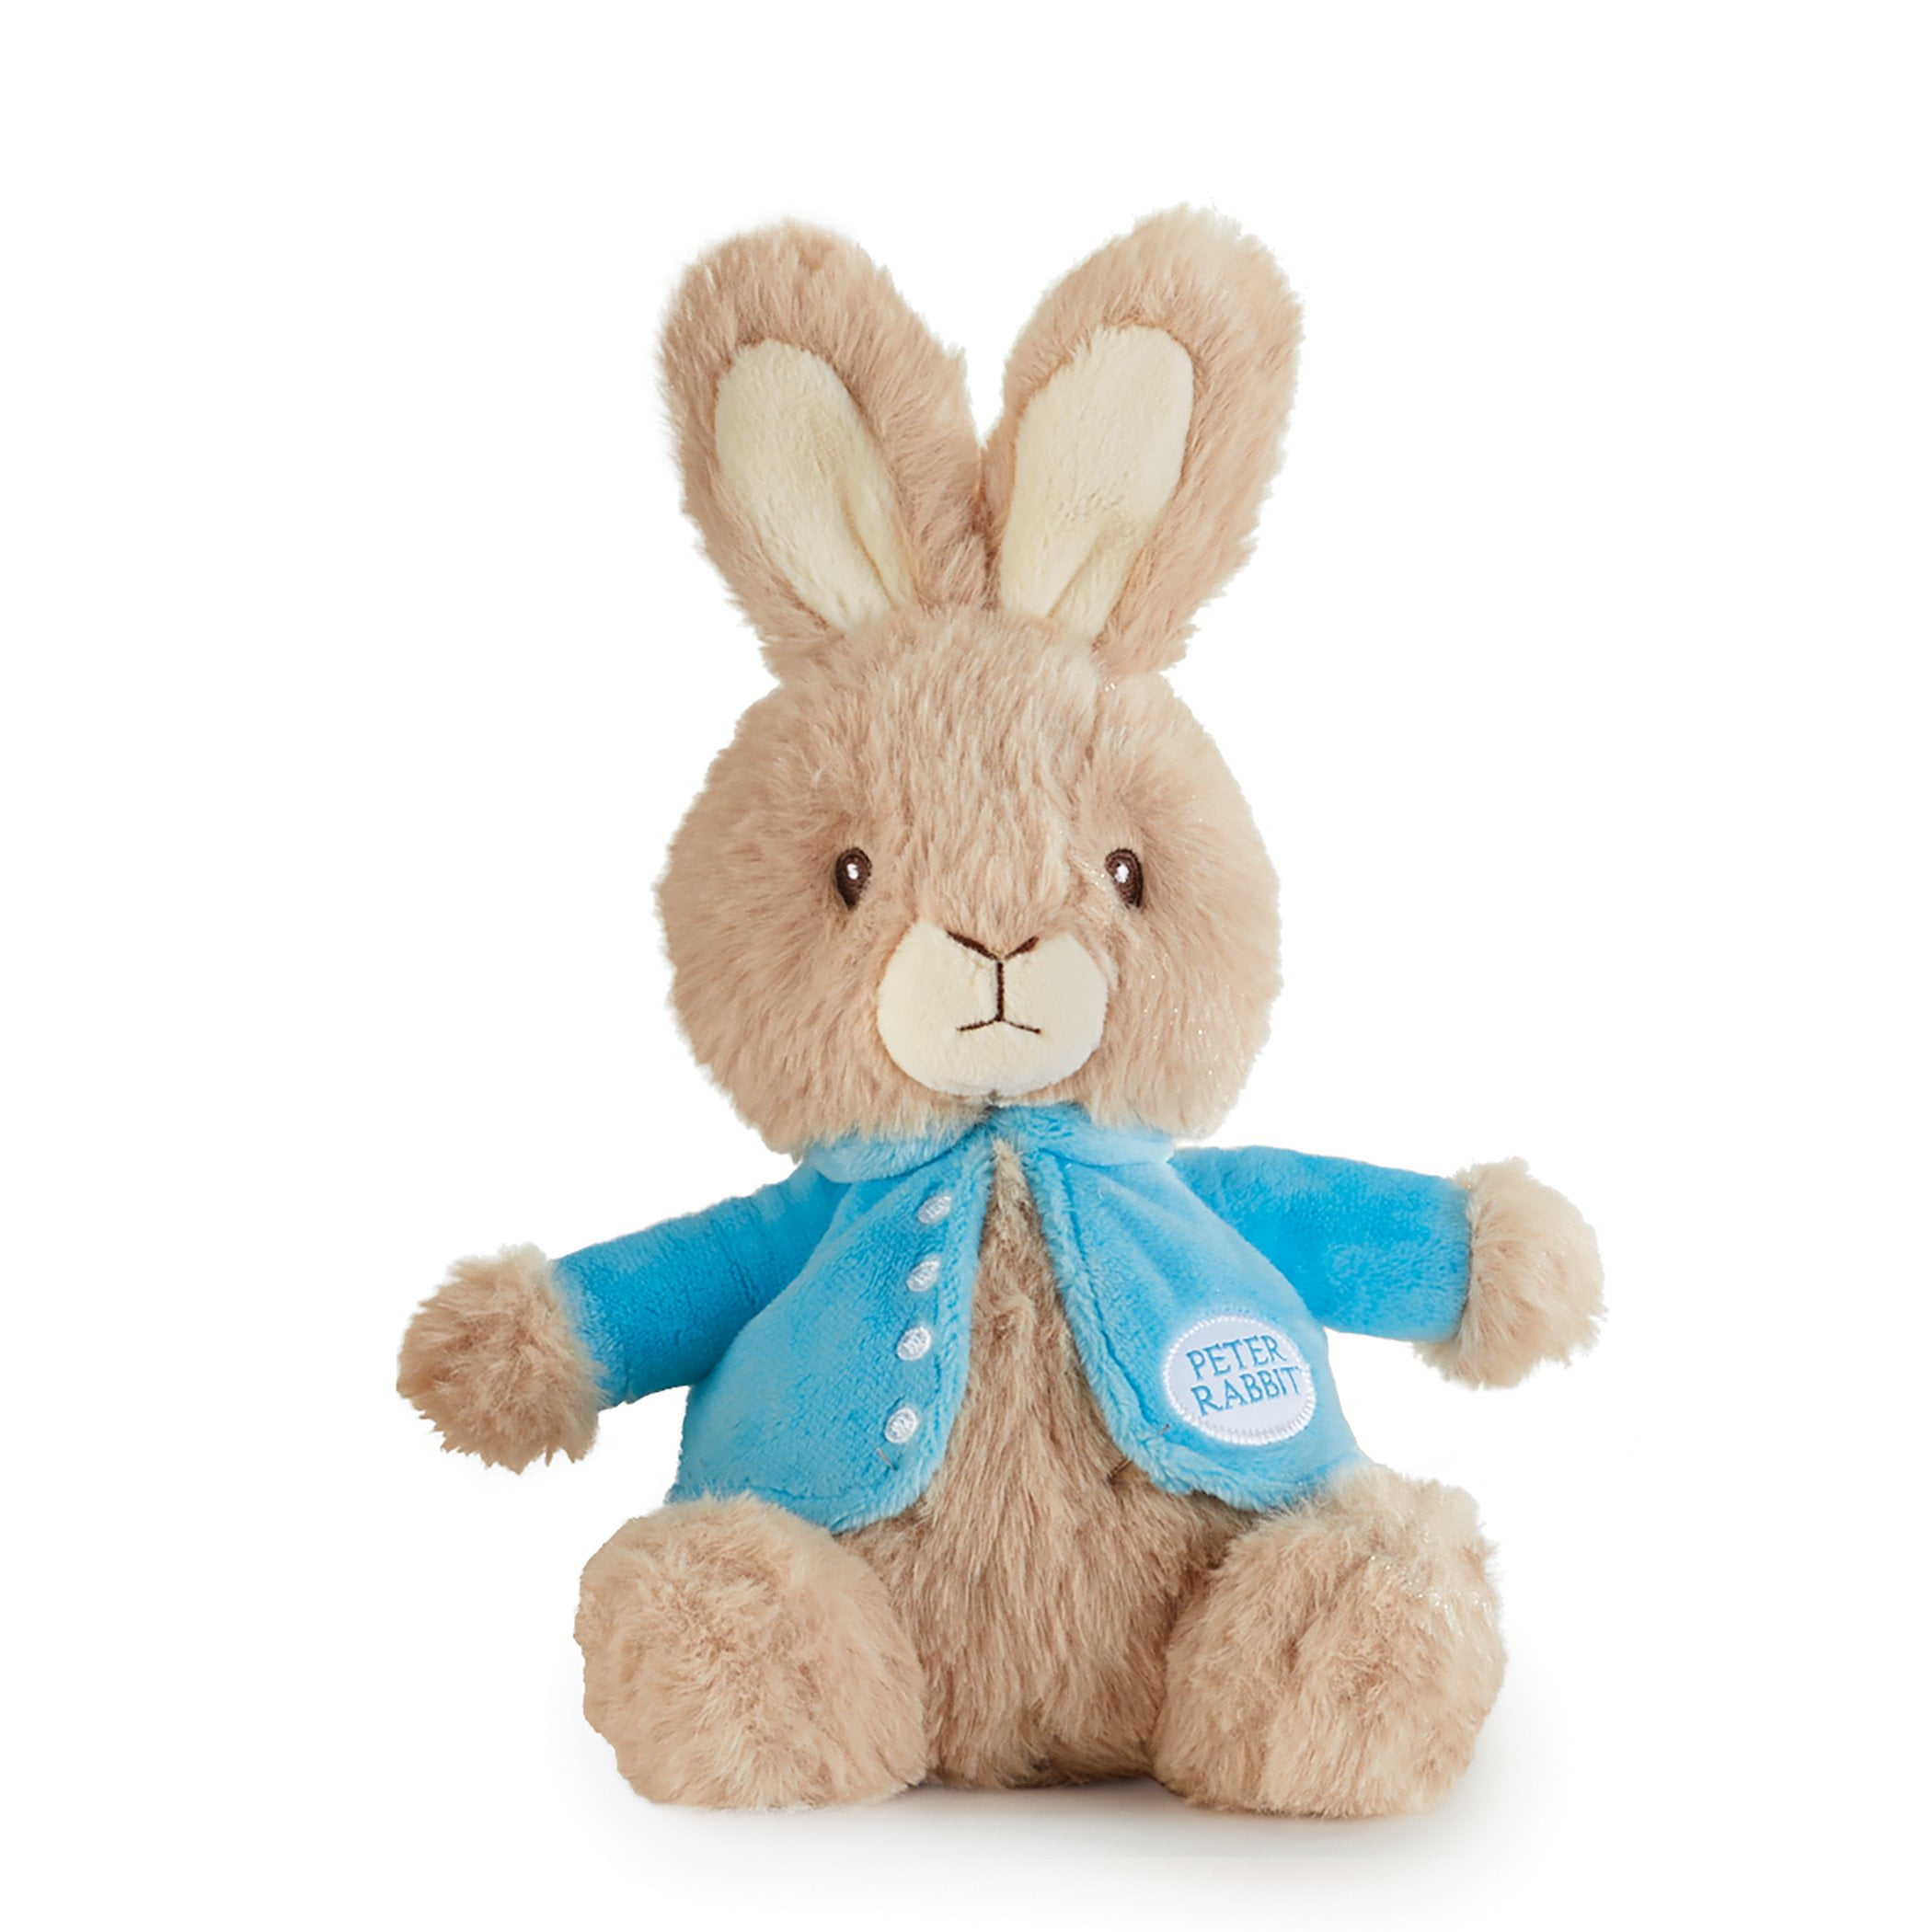 Colorful Sunny Bunny Peter Rabbit Soft Toy Stuffed Ball Shaped Cartoon Mini  Animal For Kids, Toddlers Cute Rabbit Movie TV Figure Perfect Birthday Gift  From Office2016hbhs, $4.99